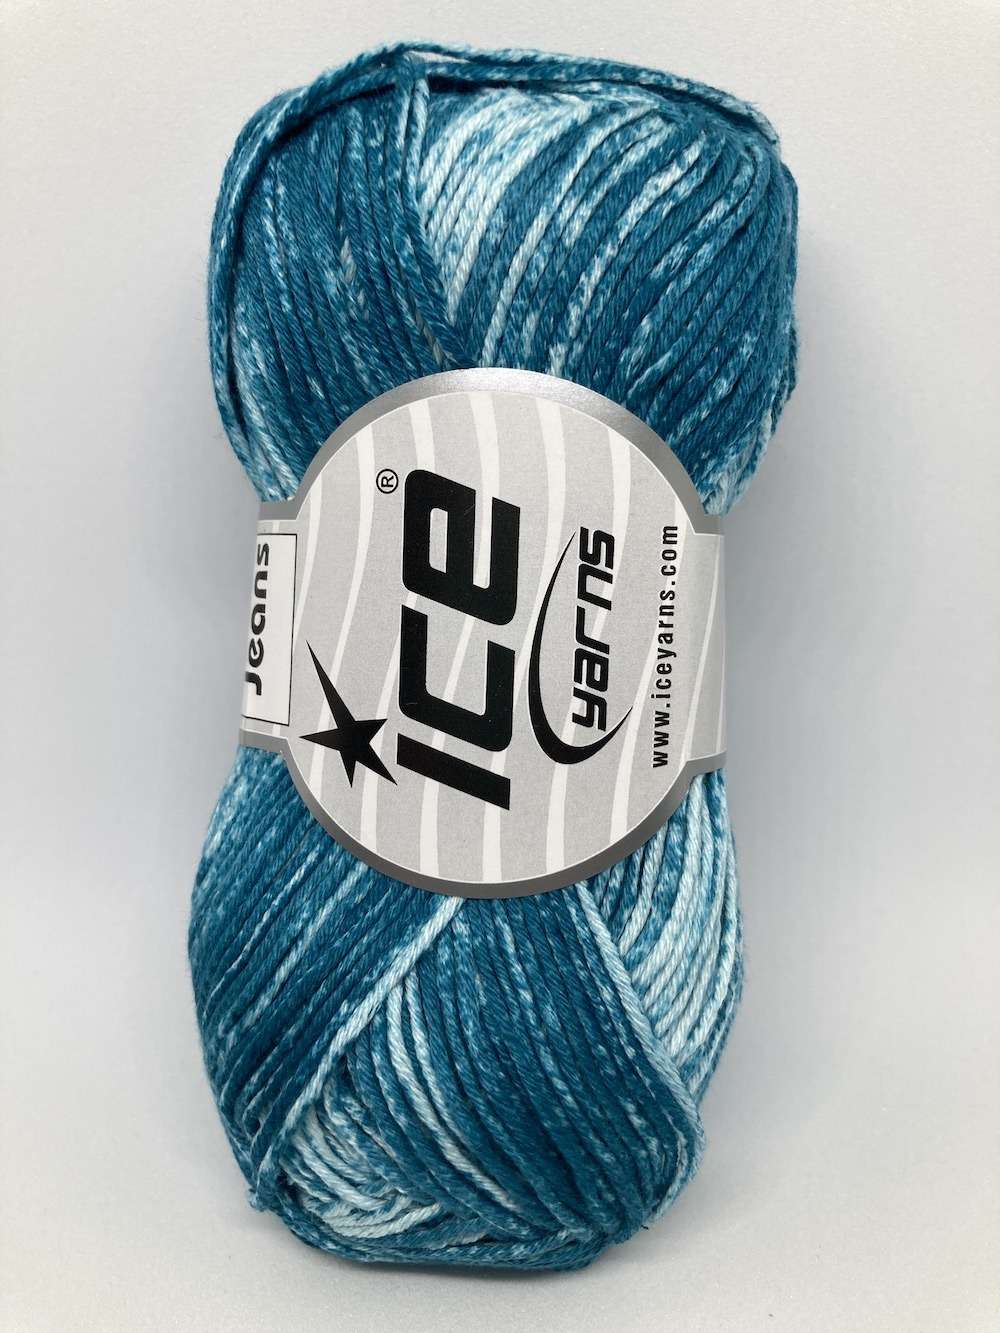 Ice Yarns 'Jeans' 8ply Denim Cotton Yarn Review